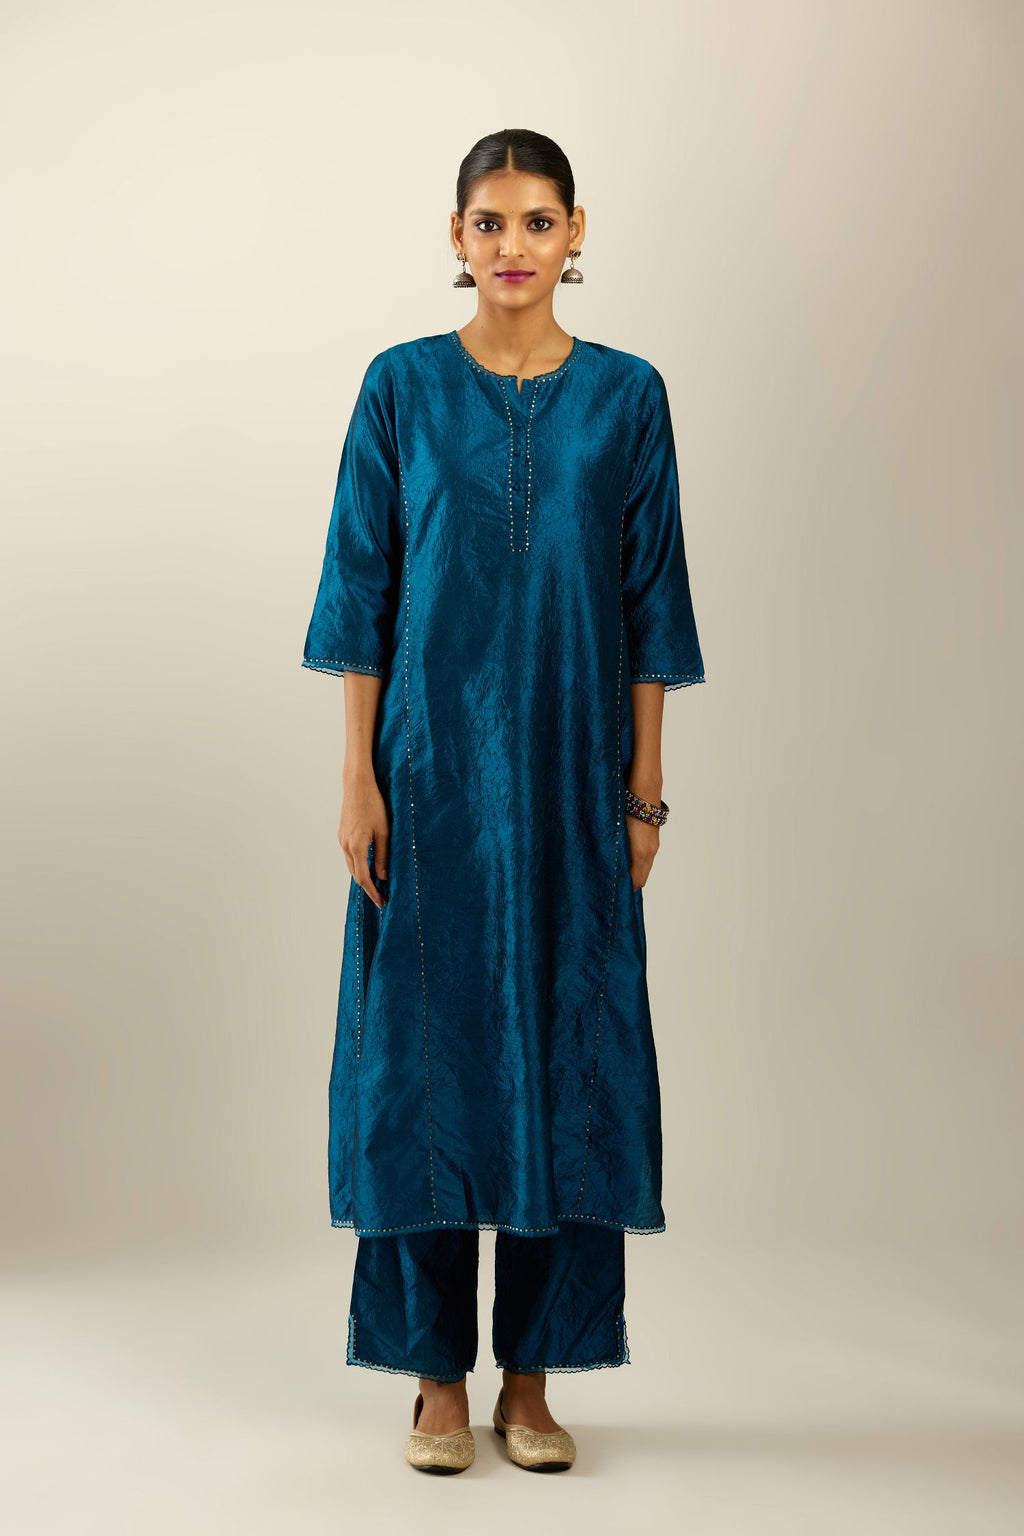 Silk hand crushed kurta set with concealed button placket neckline, highlighted with sequins and scalloped organza at edges.